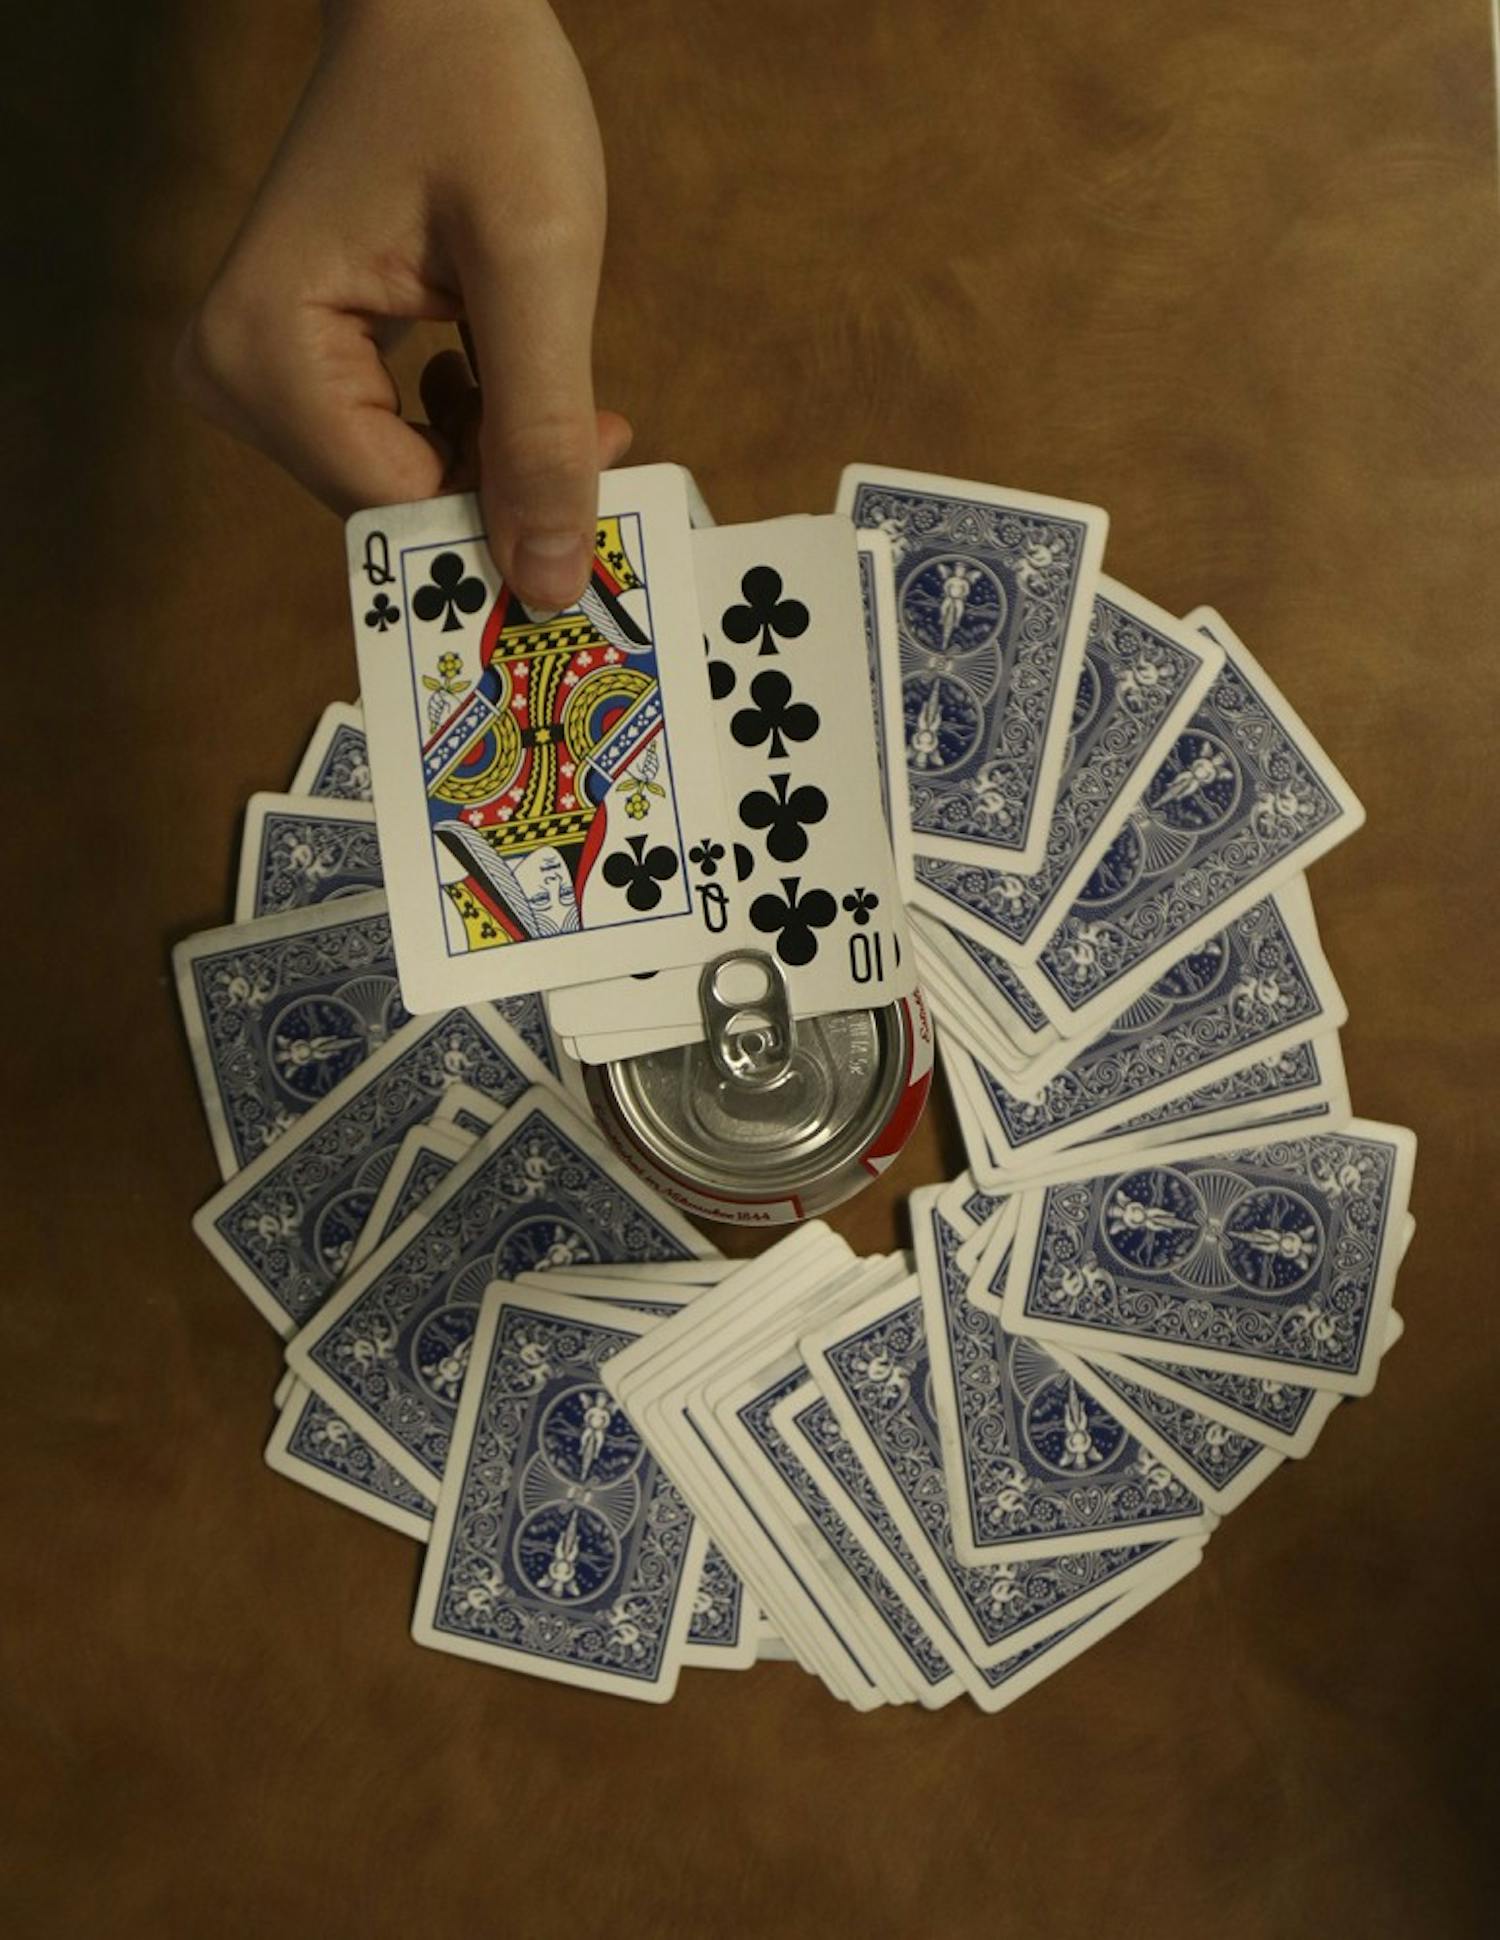 King's Cup is a classic drinking game involving a deck of cards.